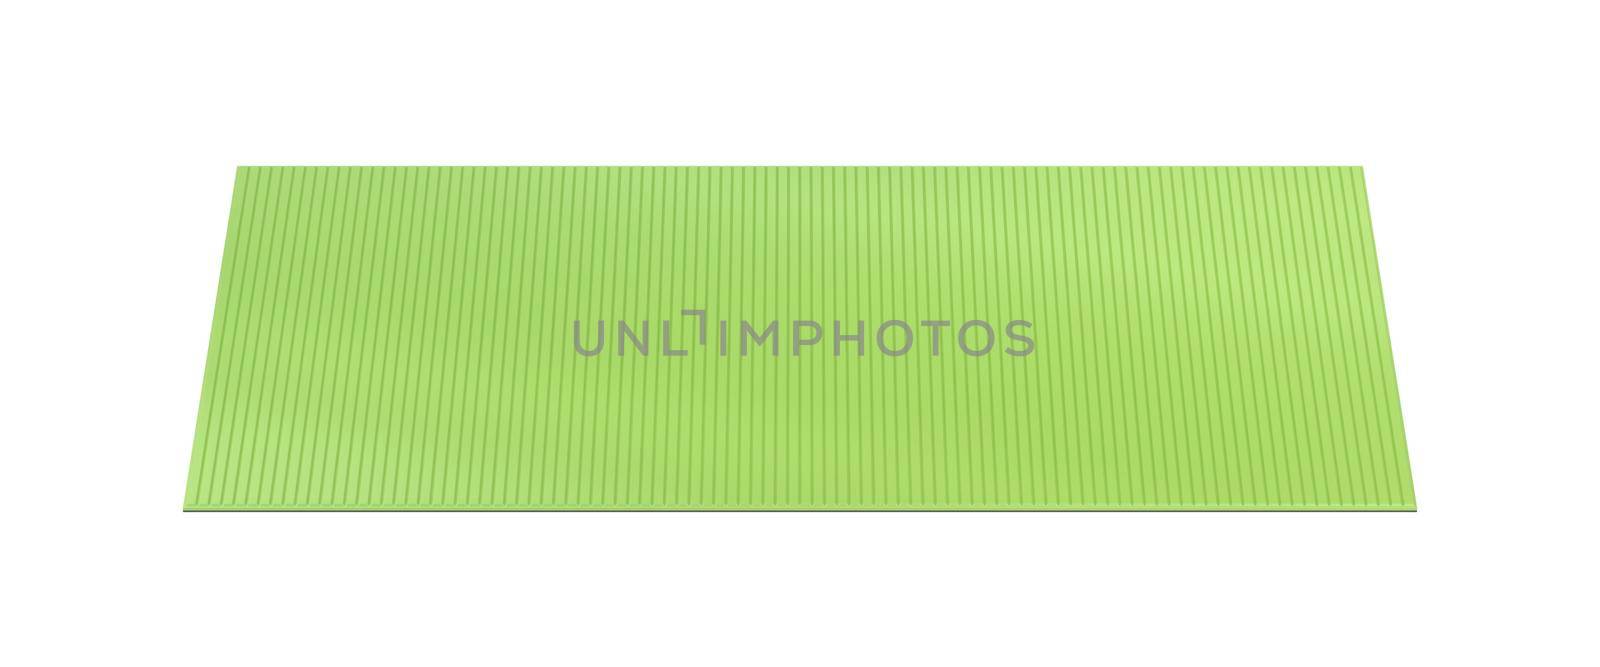 Green exercise mat isolated on white background